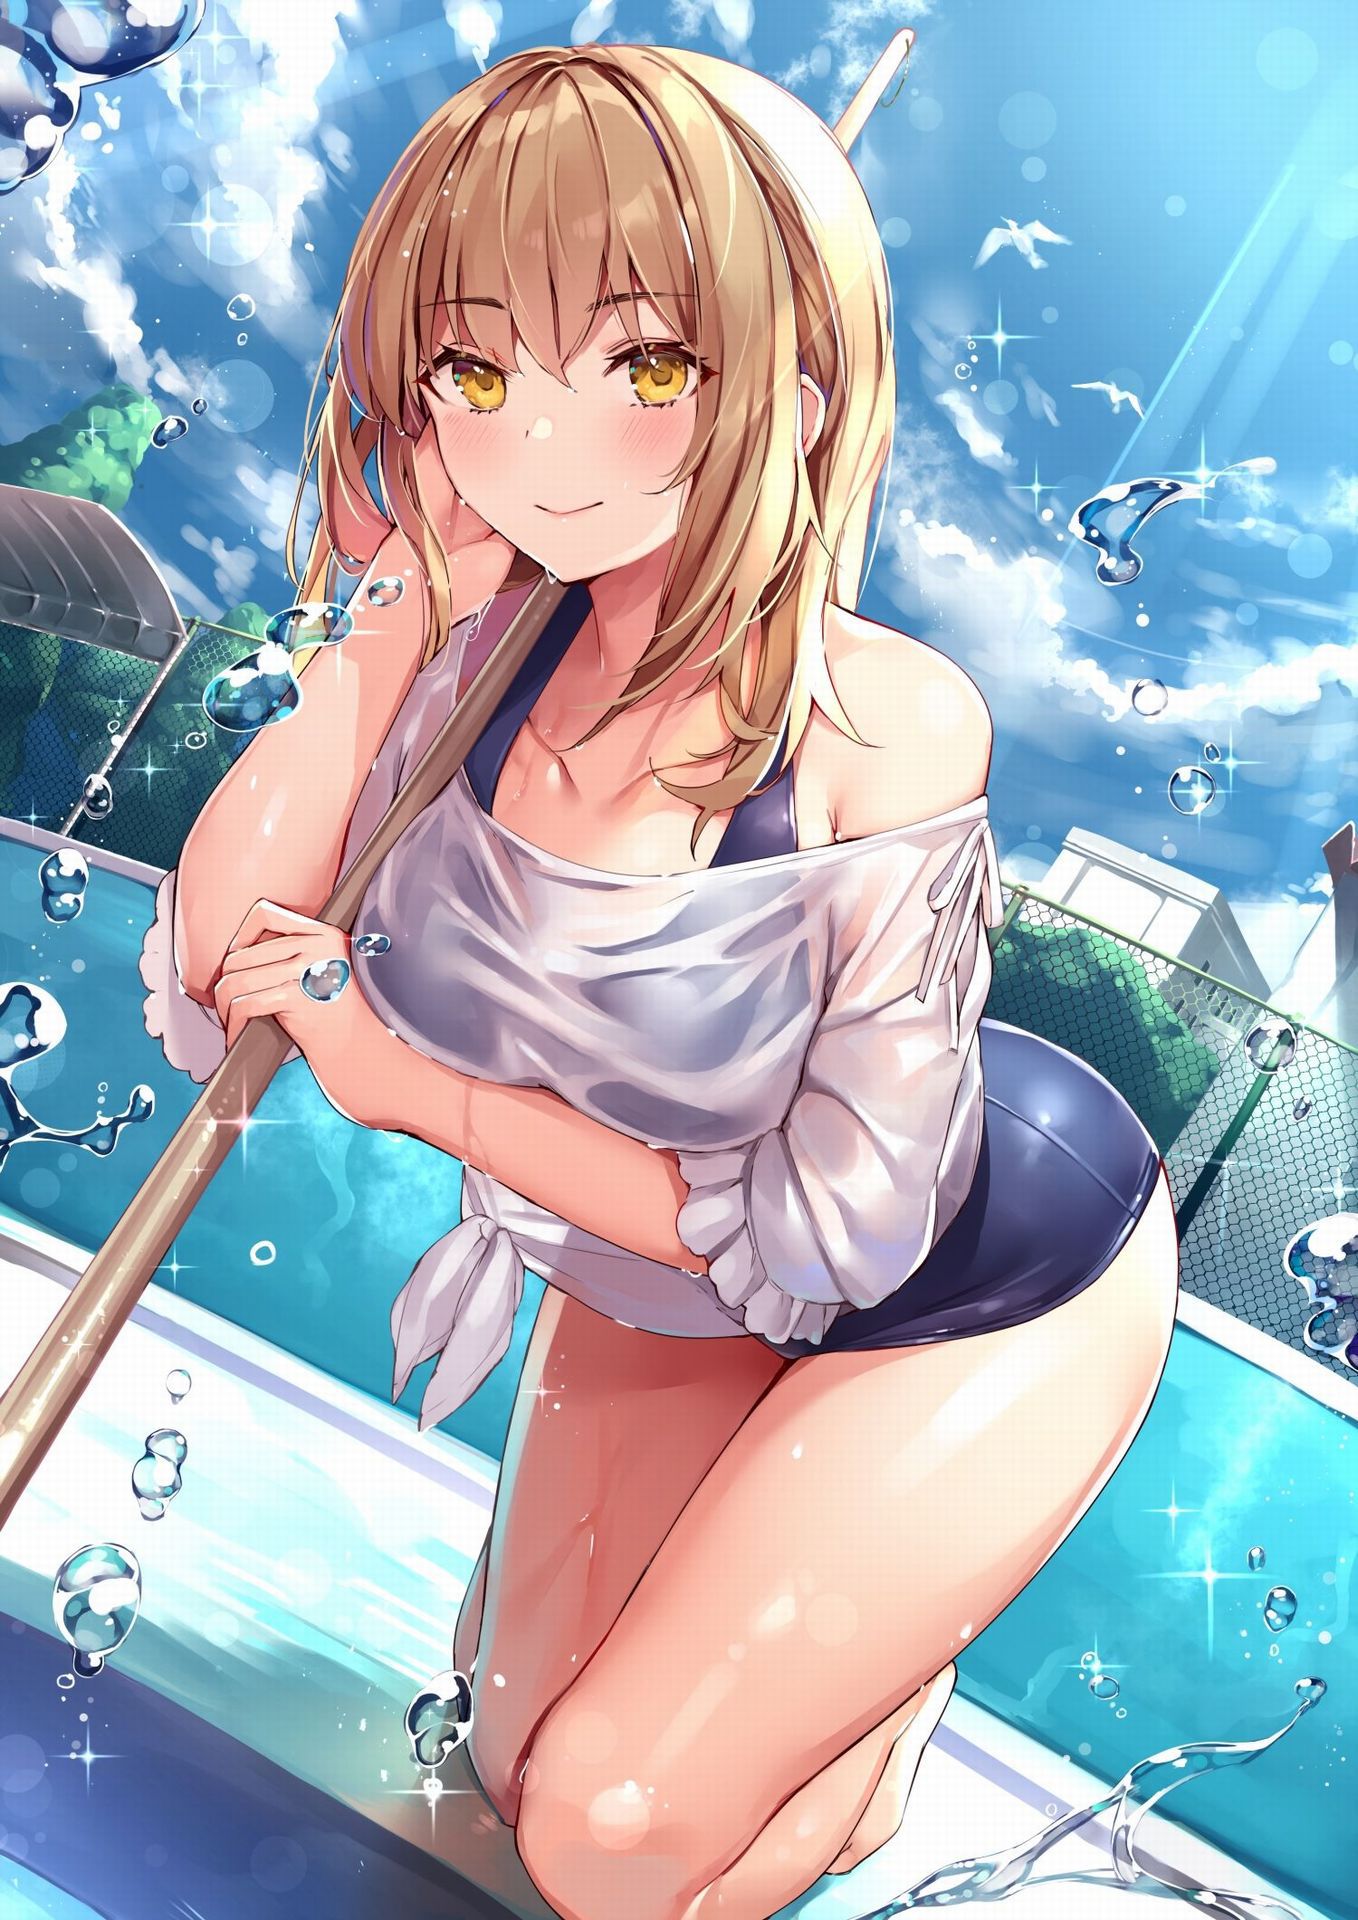 [Secondary/ZIP] wet transparent beautiful girl image that I see underwear or skin wet clothes 10